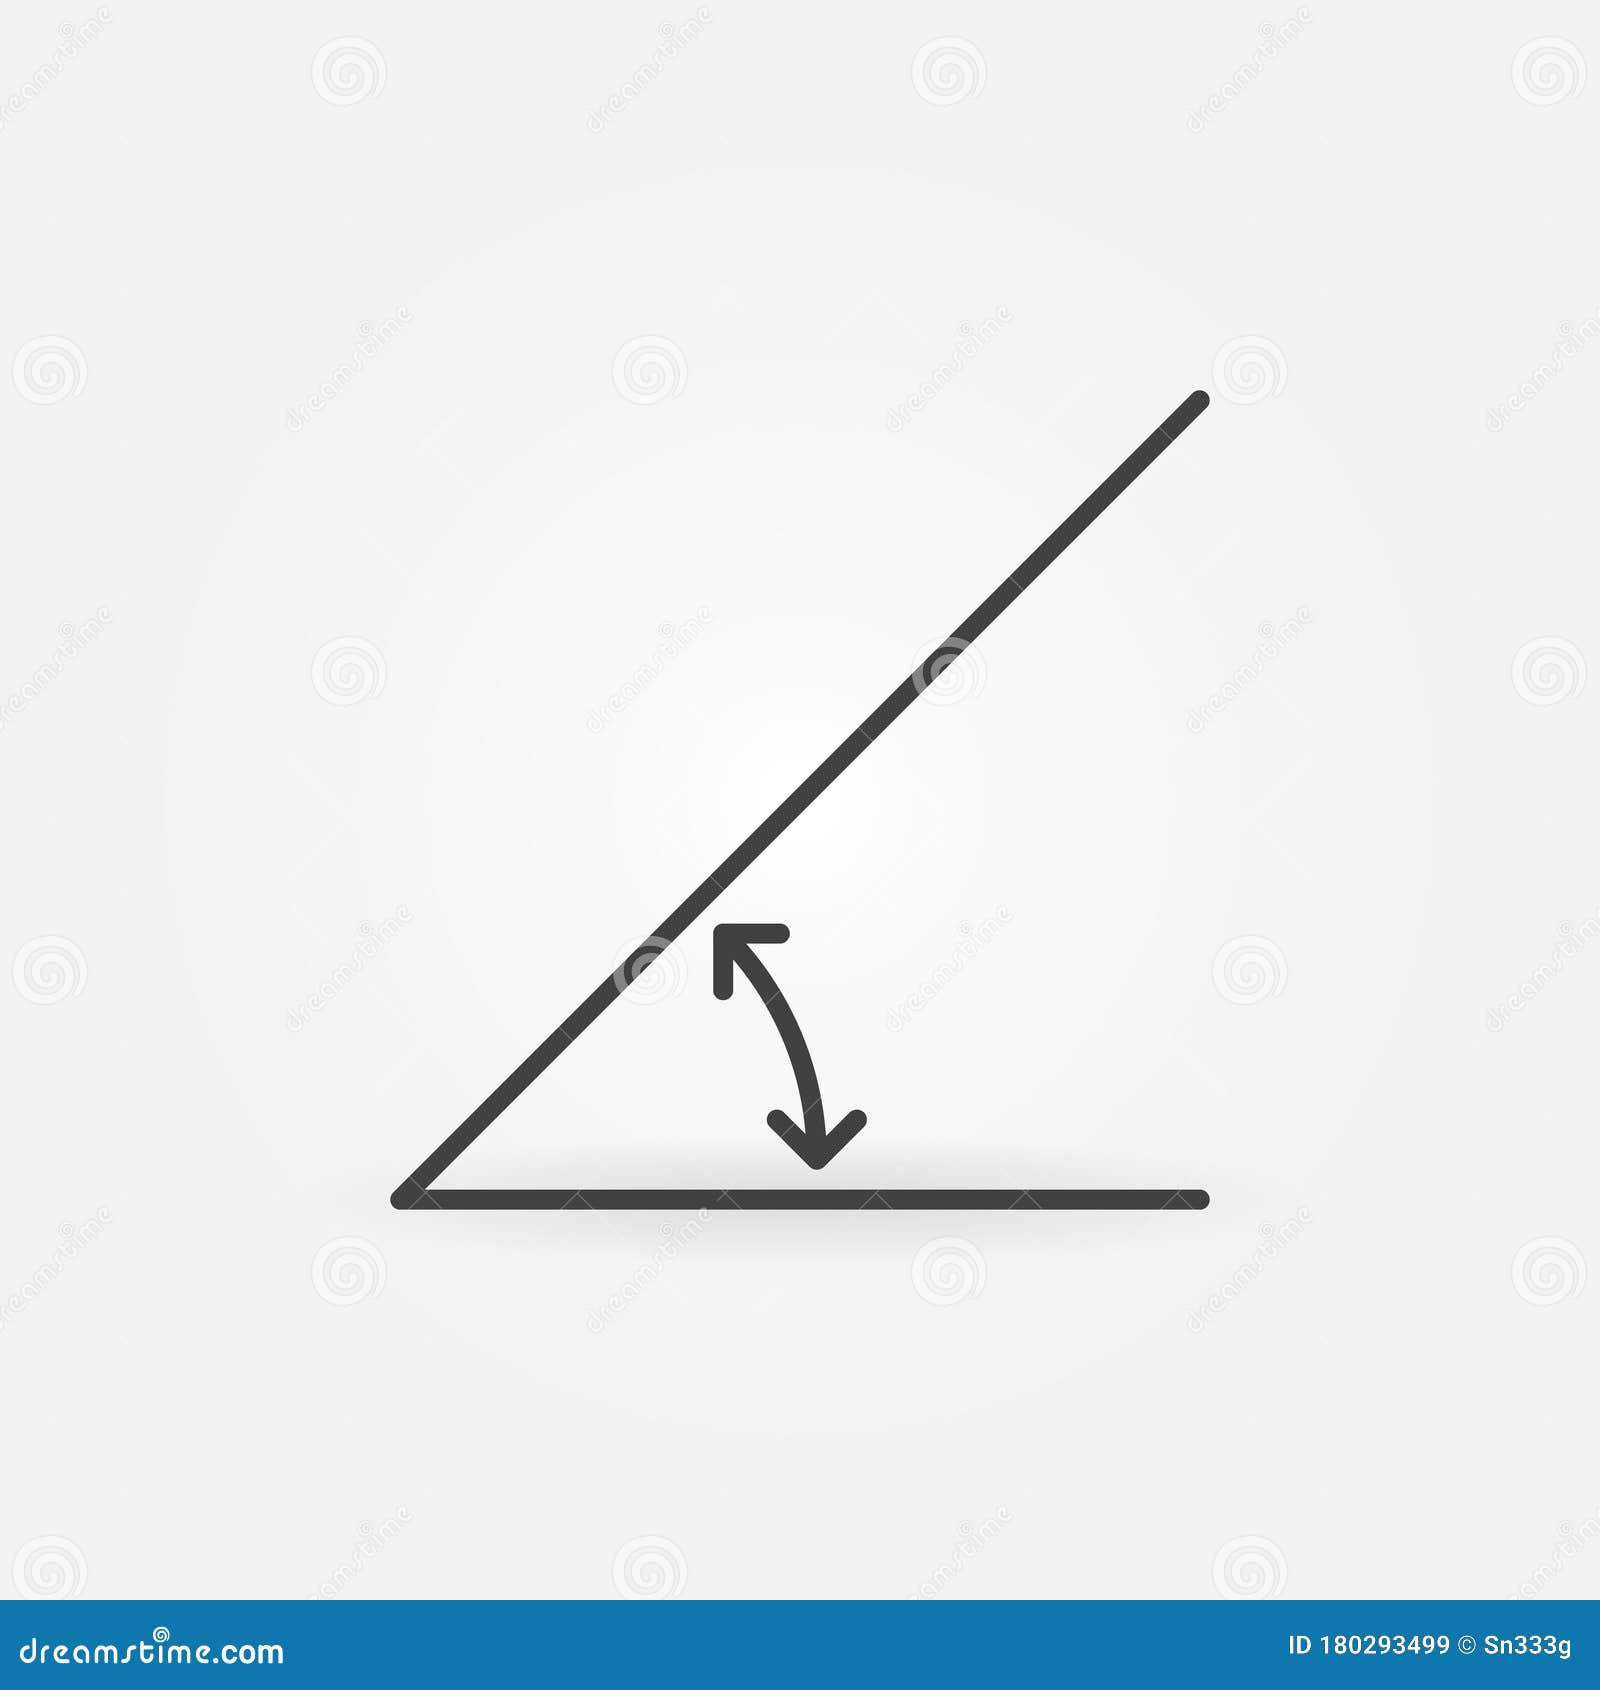 45 degrees angle linear  concept icon or sign